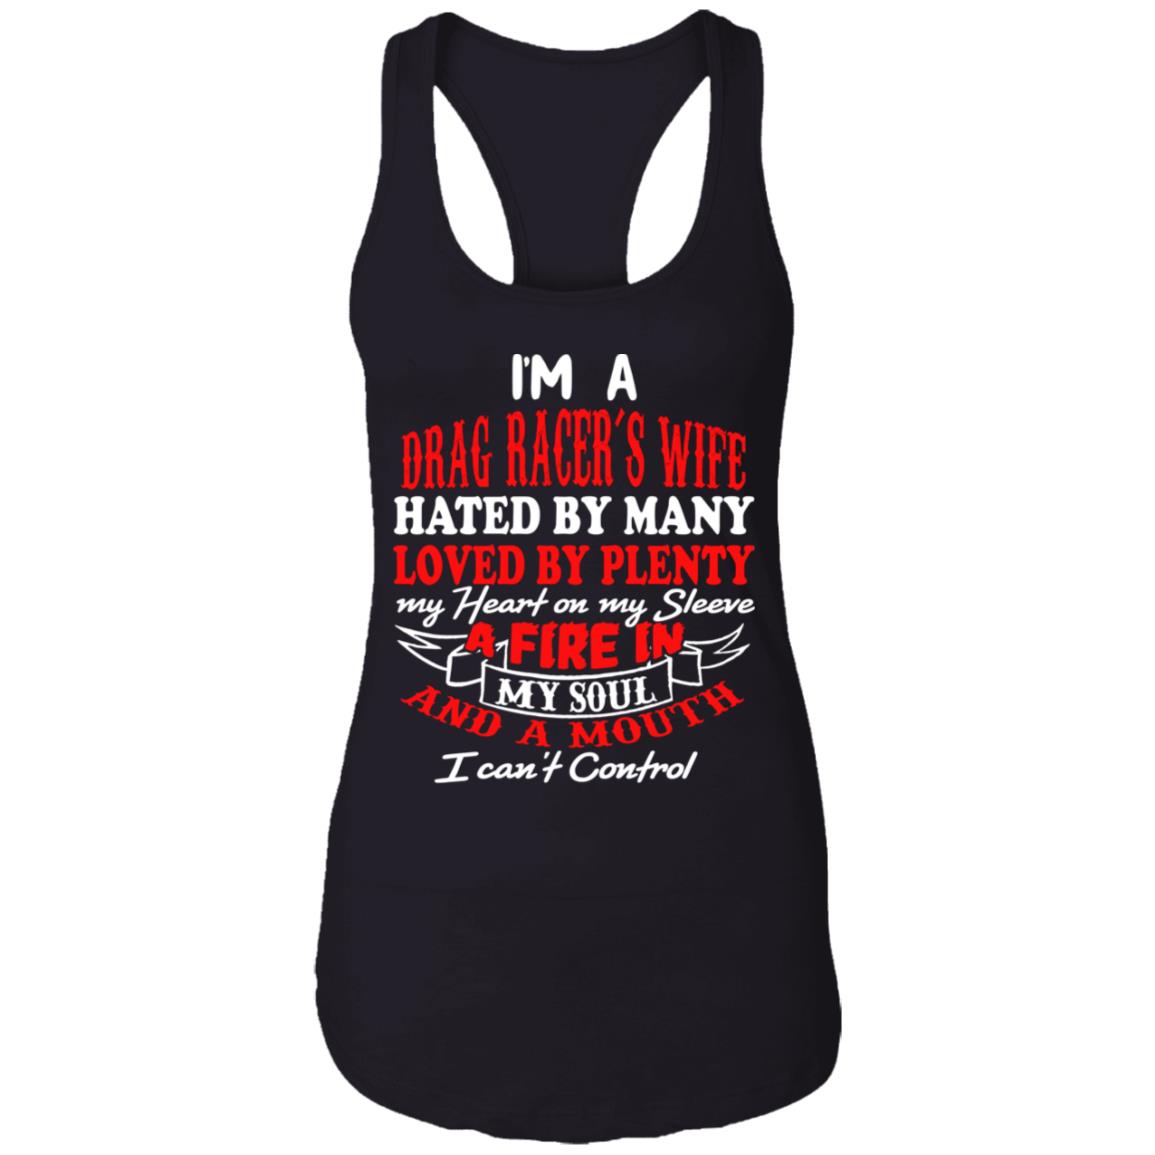 I'm A Drag Racer's Wife Hated By Many Loved By Plenty Ladies Ideal Racerback Tank